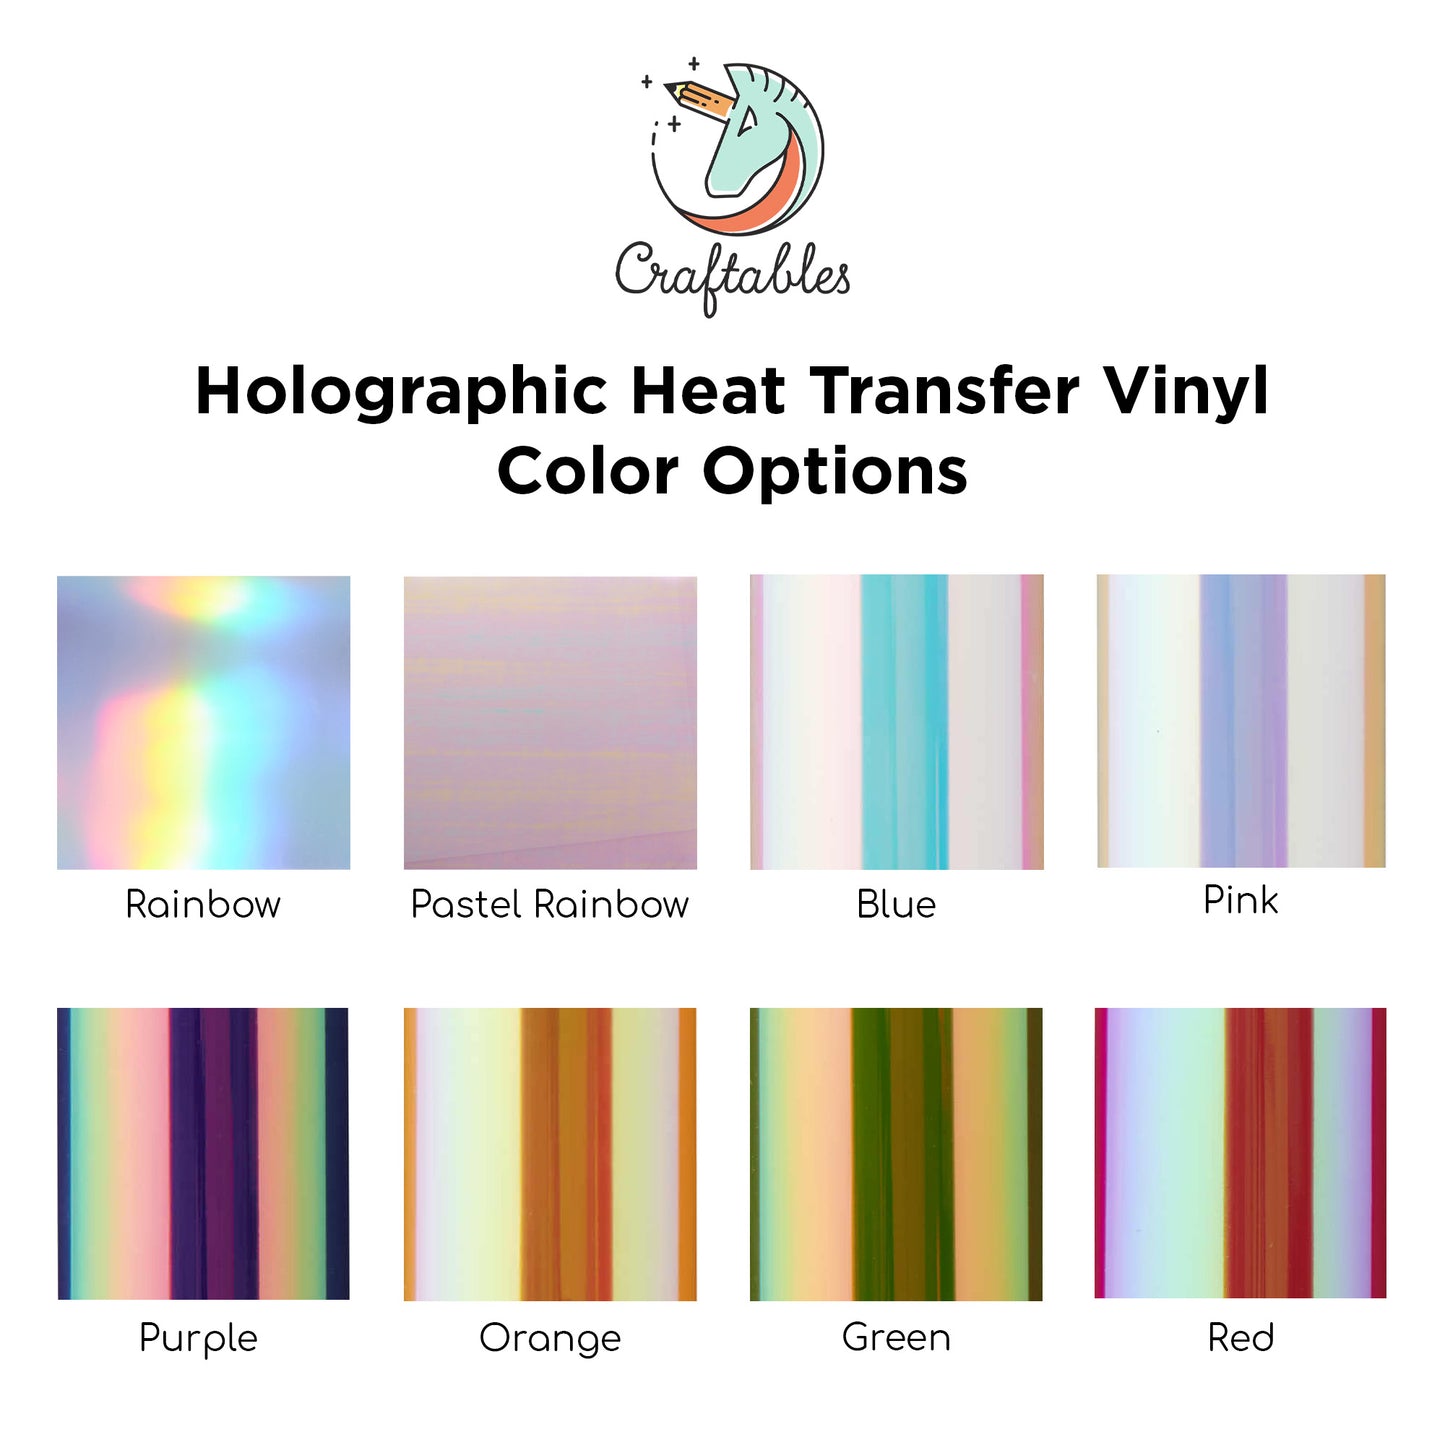 Pastel Rainbow Holographic Heat Transfer Vinyl Sheets By Craftables